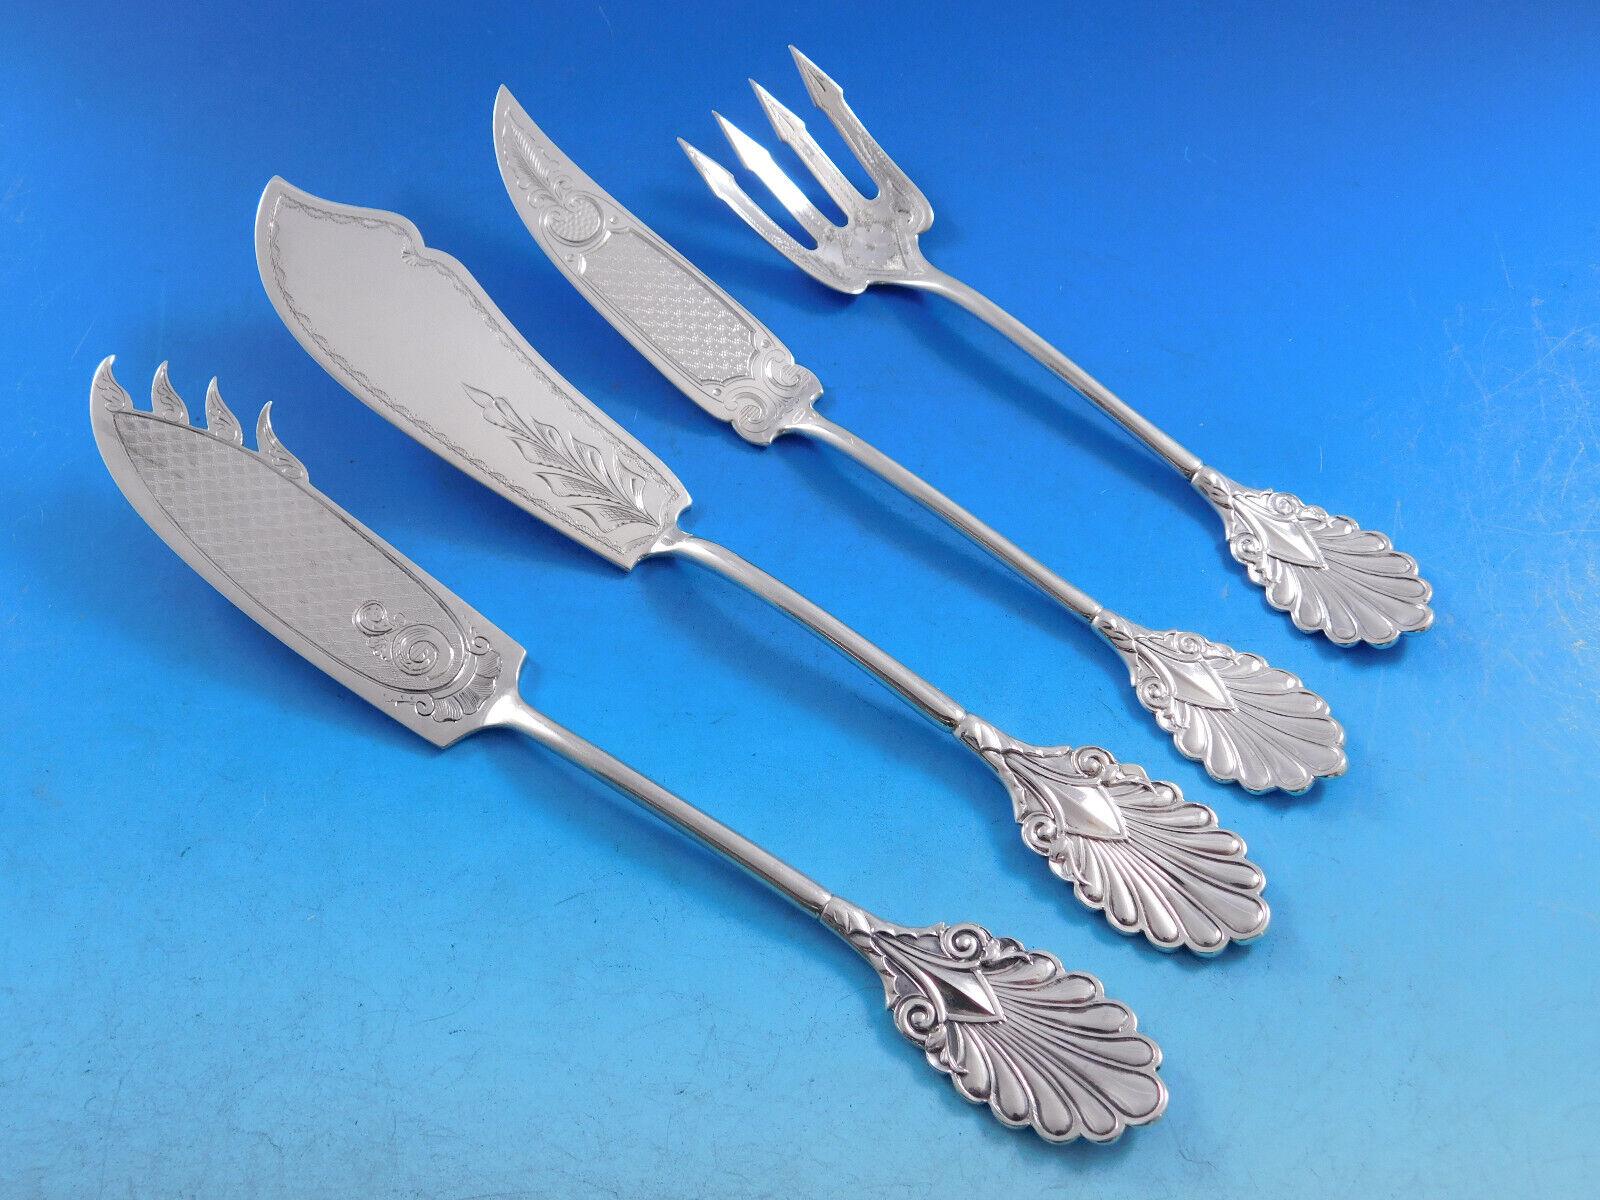 Grecian by Gorham Sterling Silver Flatware Service Rare circa 1861 Early 149 pcs For Sale 2